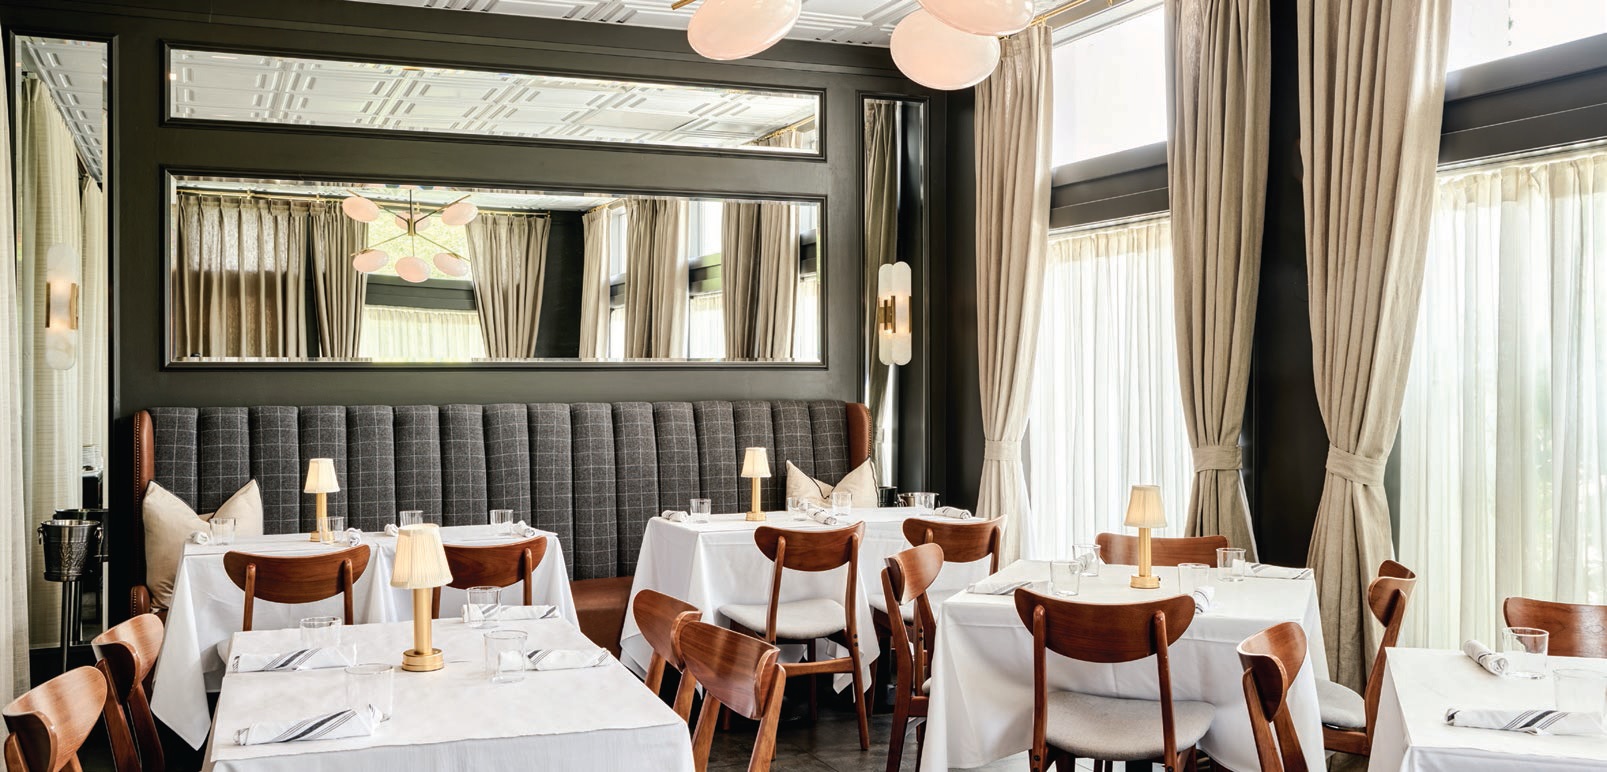 The Aboyer dining room, where a new menu of classics and dishes that nod to the early days of the chef’s tenure in Winnetka are served INTERIOR PHOTO BY DANIEL KELLEGHAN